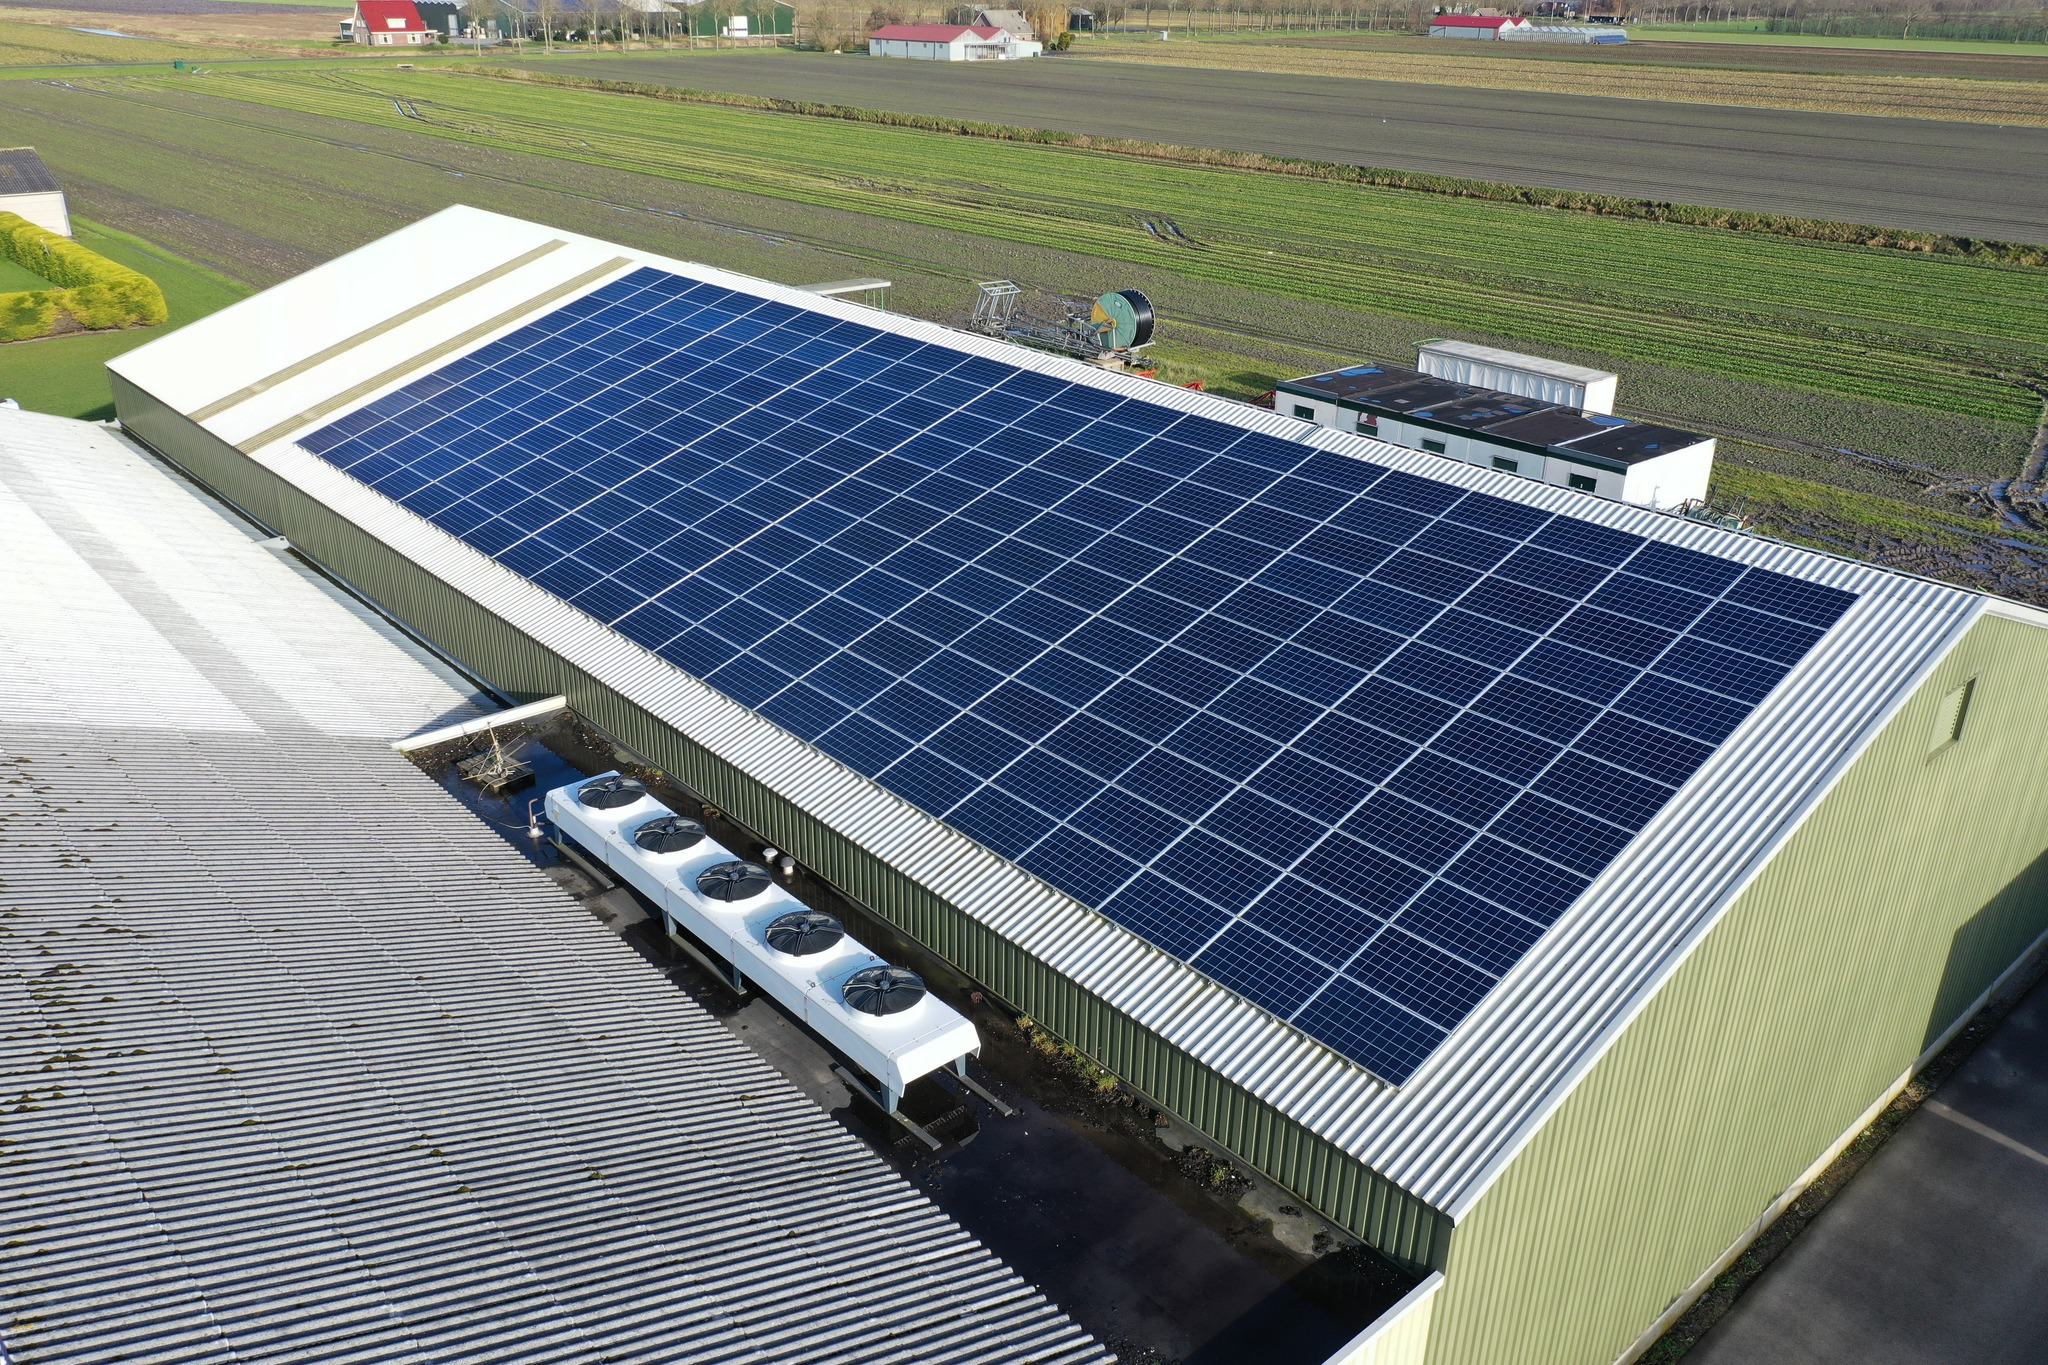 Solar panels on a roof of a company colored blue by sunlight. Solar panels are a cheap and sustainable way to get energy from sunlight. Photo taken with a flying drone